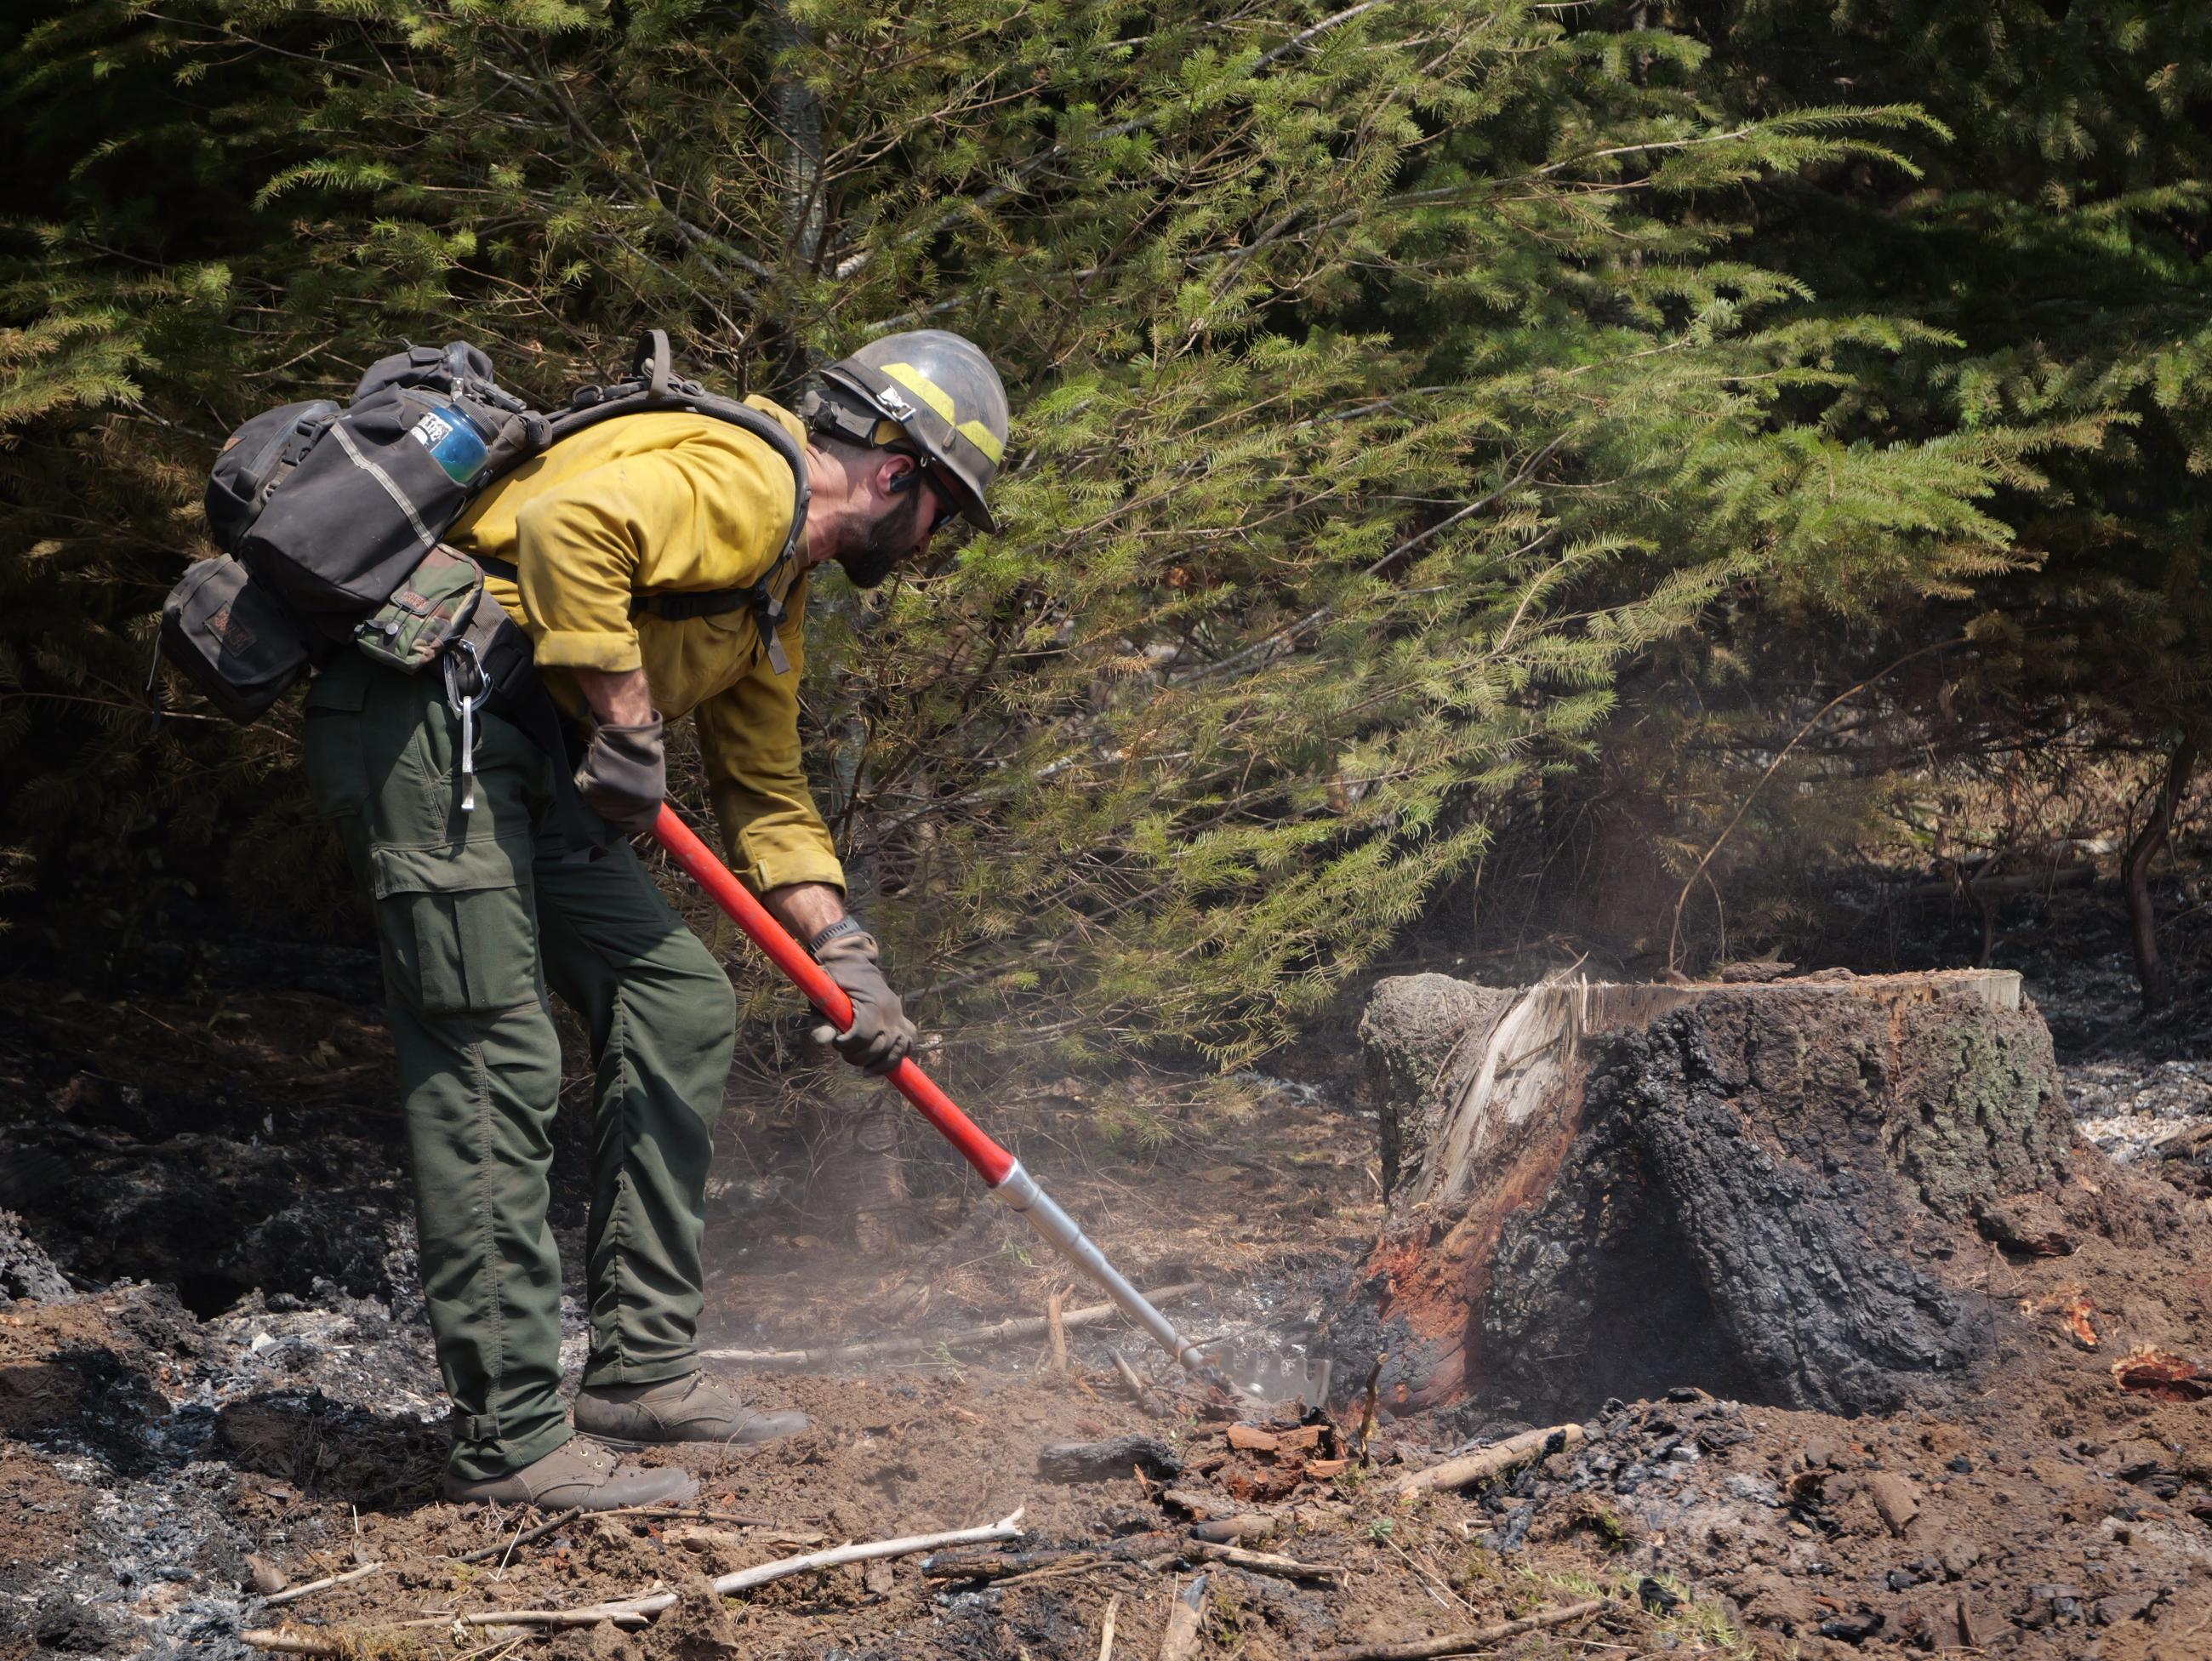 A firefighter is shown digging near a stump during the Bedrock Fire, 2023.